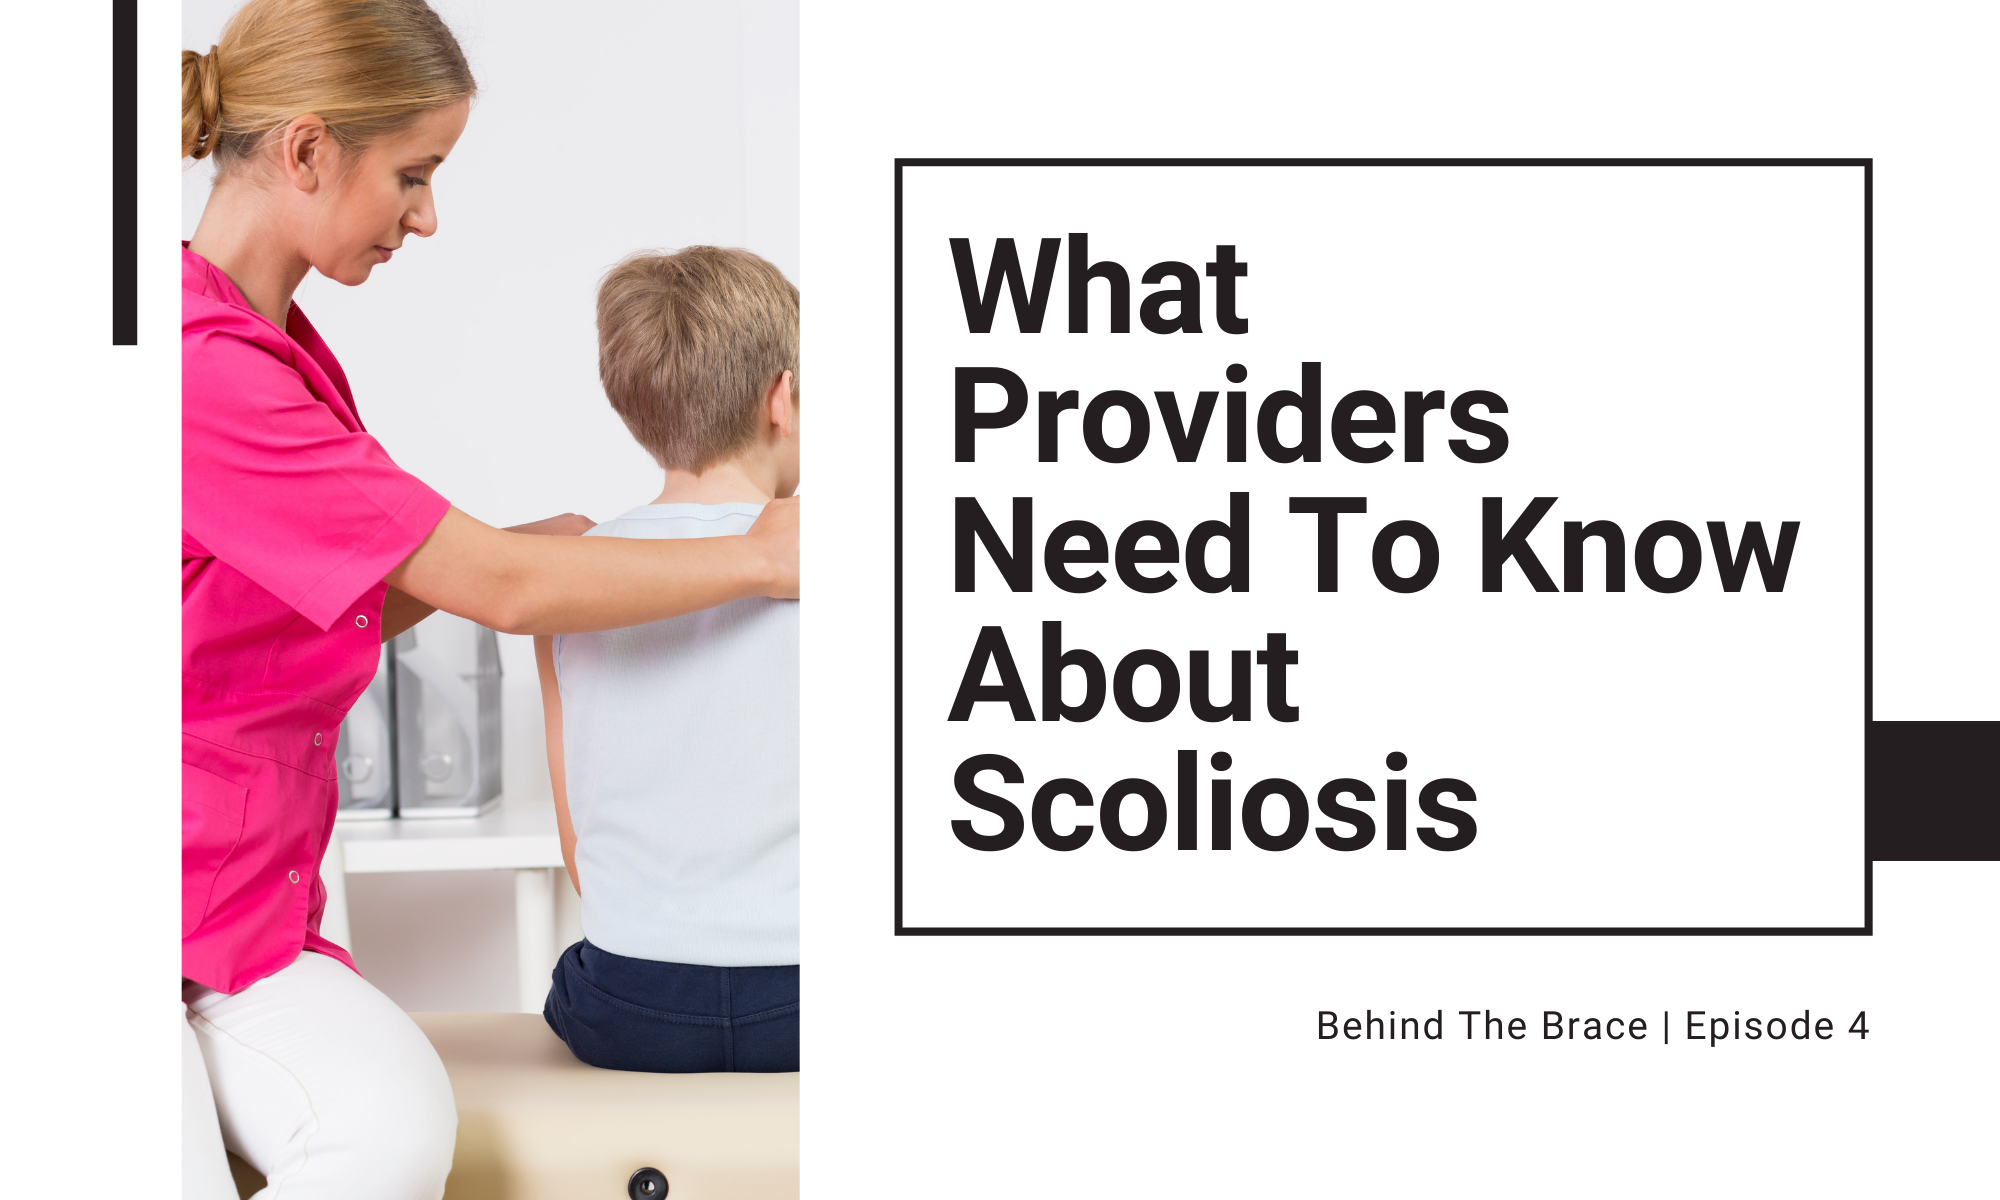 What Providers Need To Know About Scoliosis